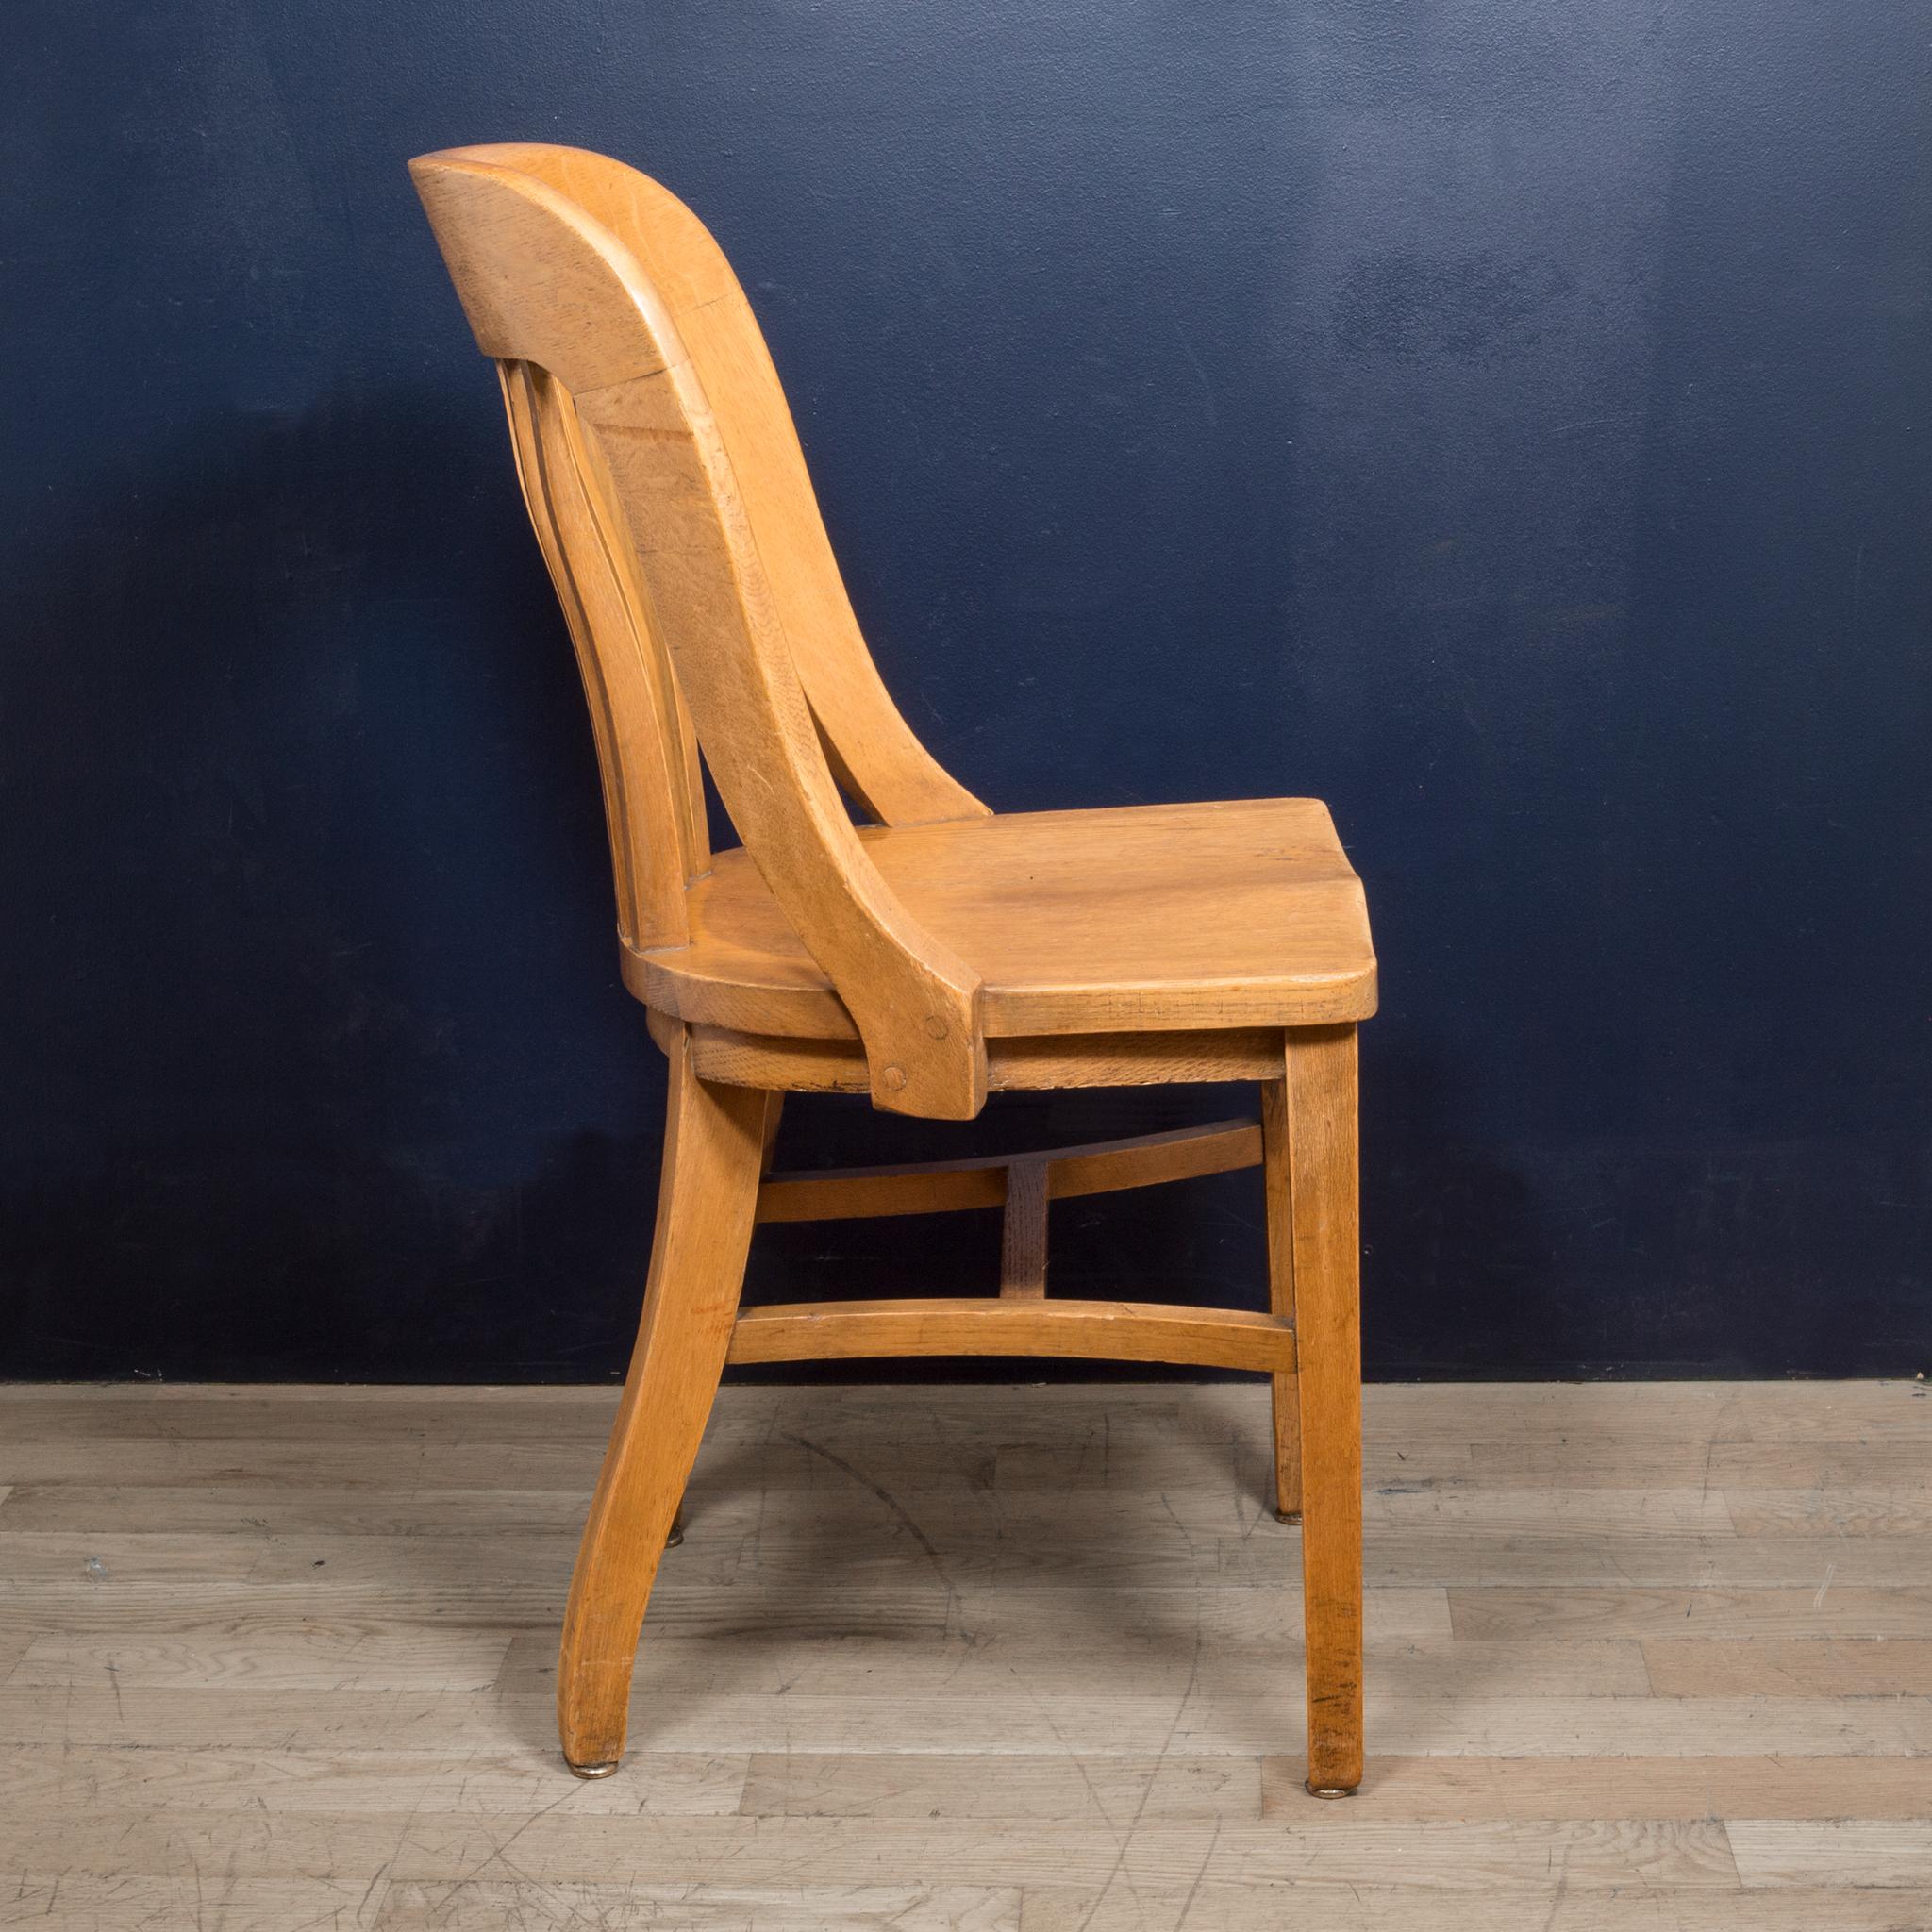 heywood brothers and wakefield company chair